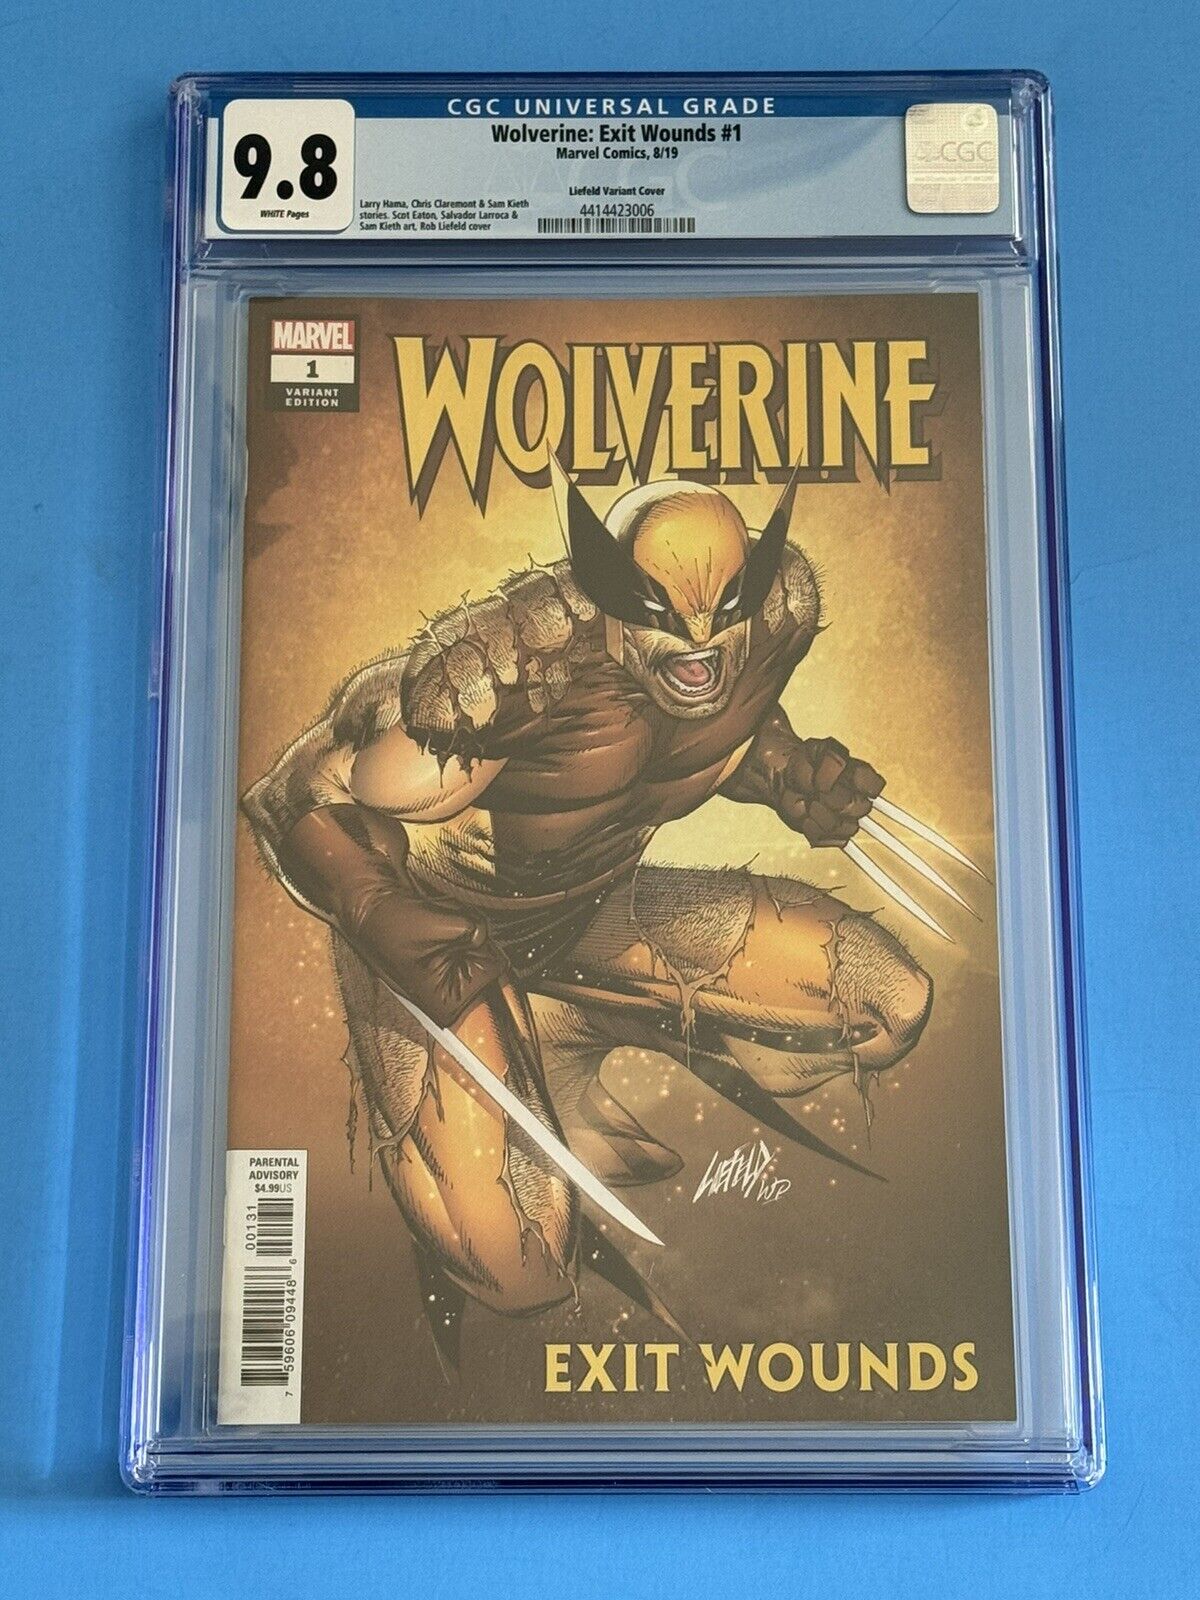 Wolverine Exit Wounds #1 Cgc 9.8 Rob Liefeld Variant Cover  1:50 - Rare